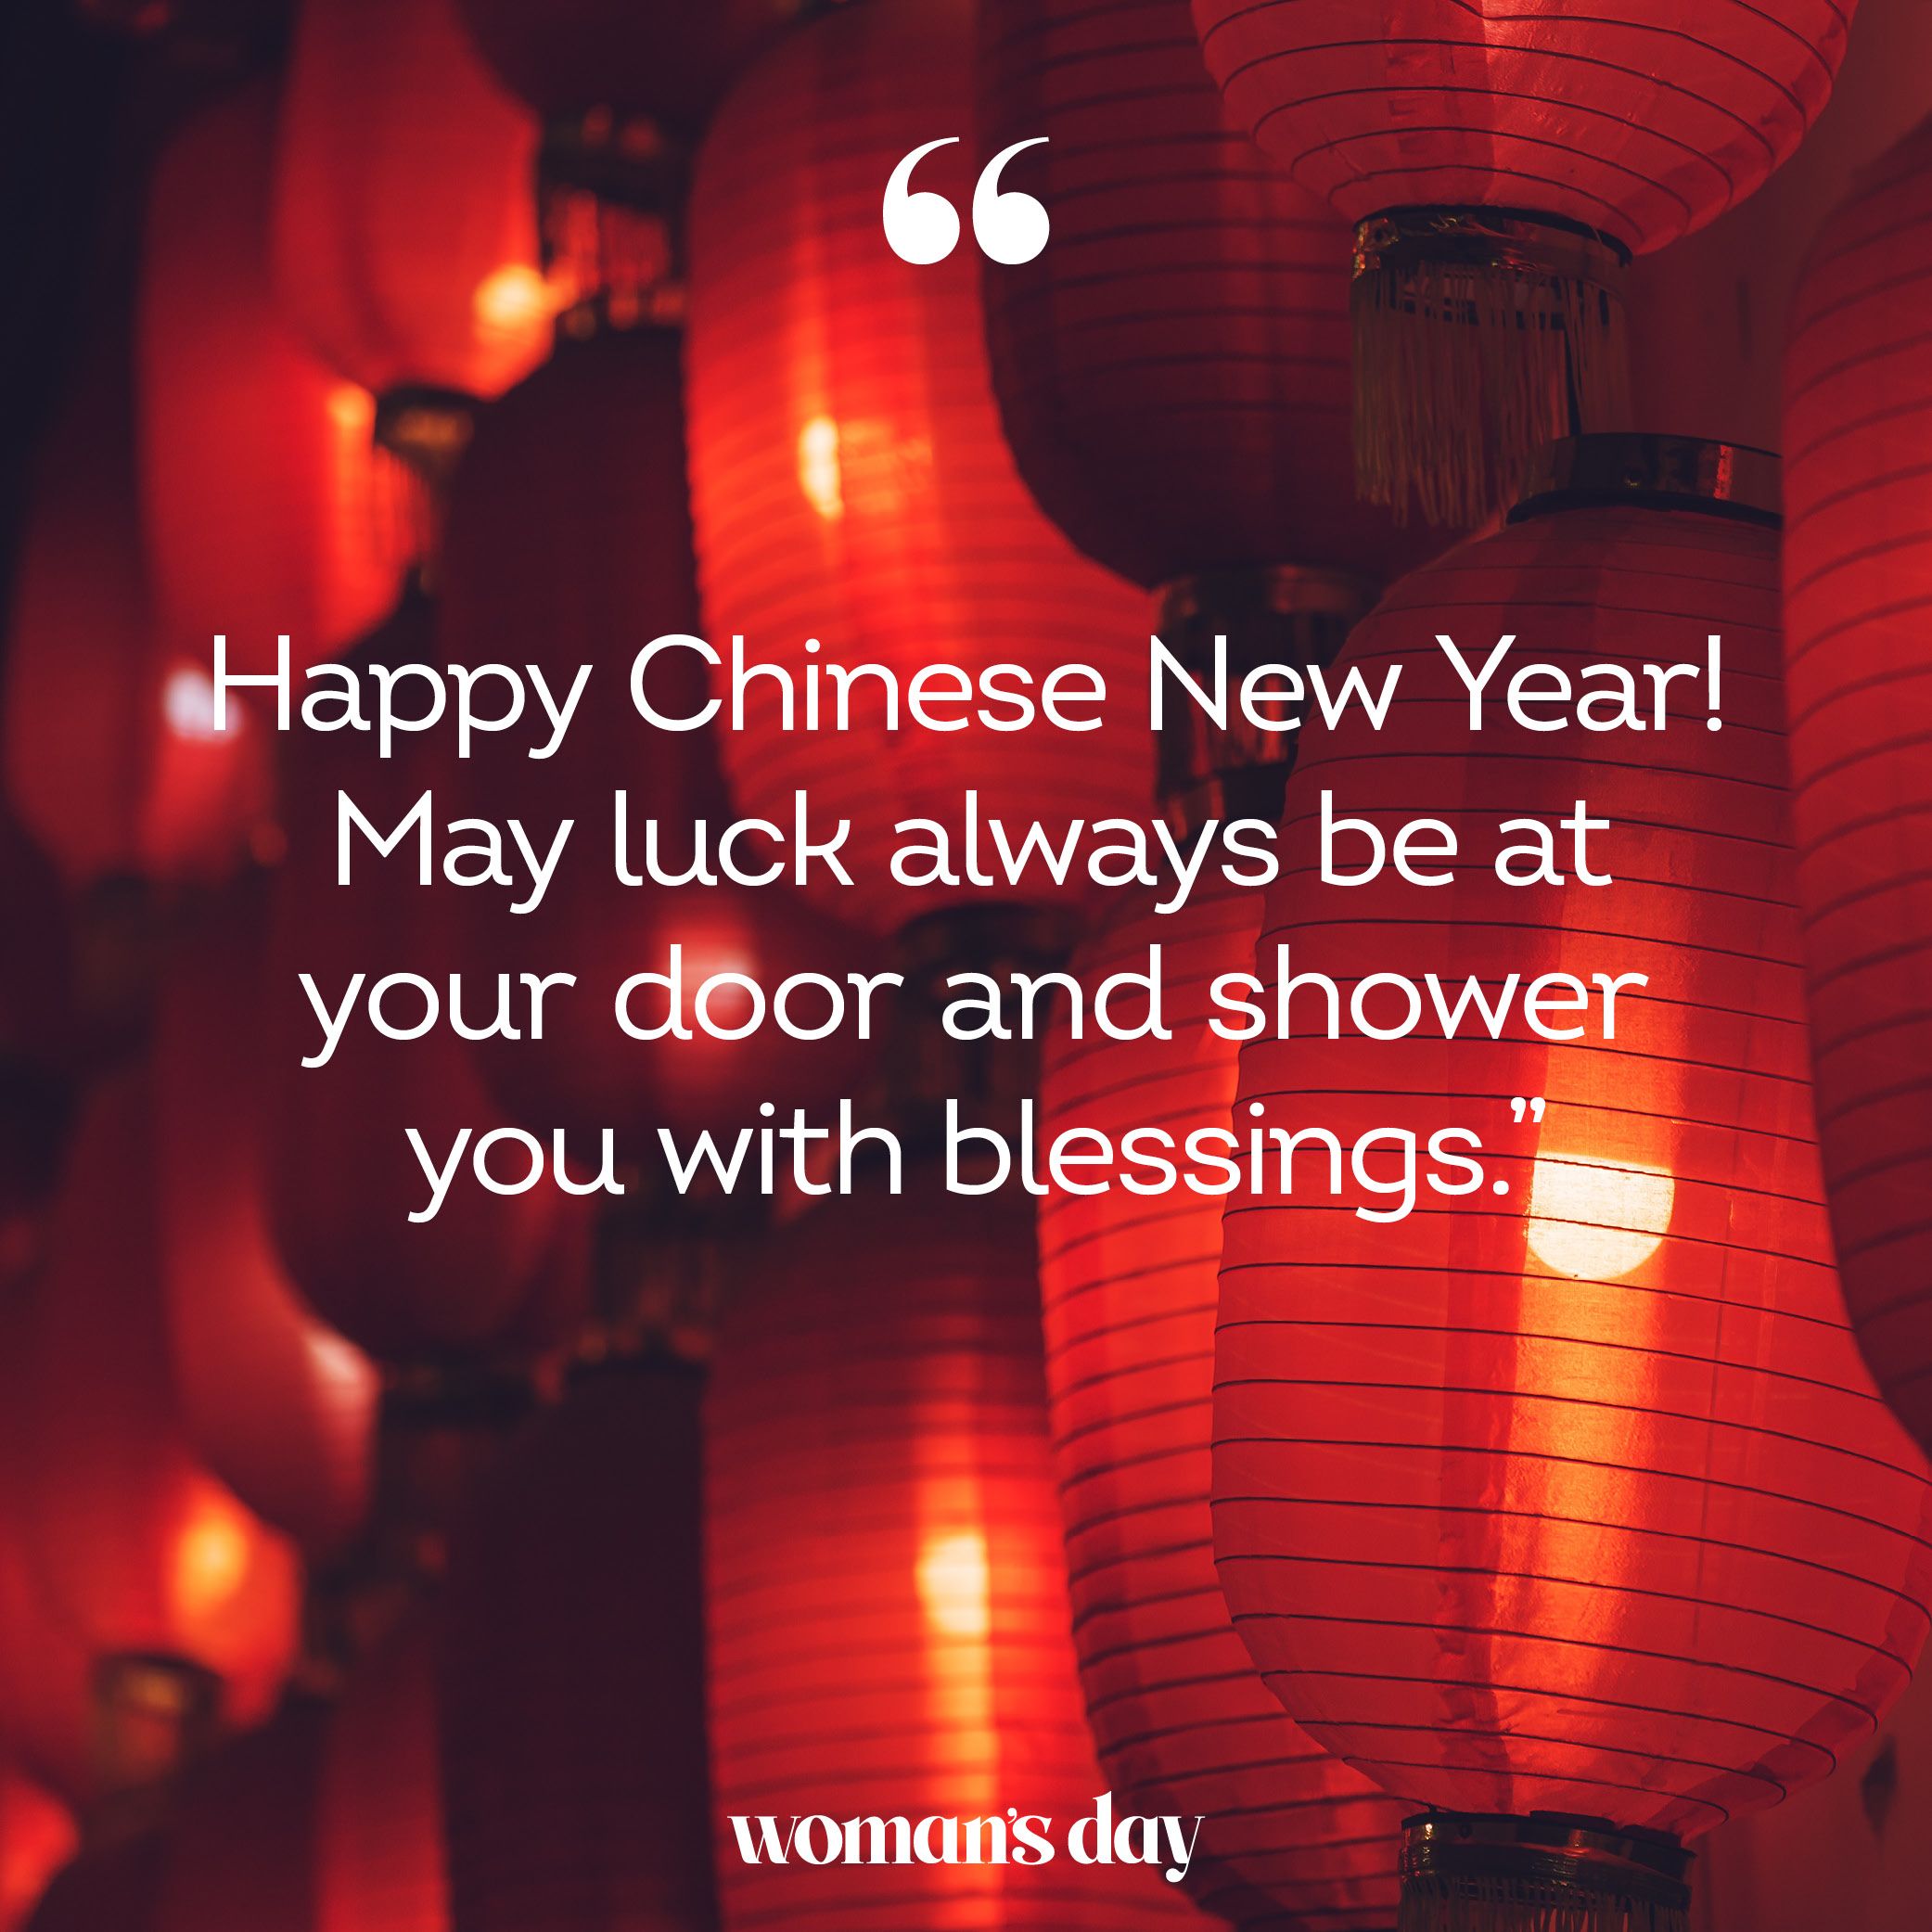 how do you greet someone happy chinese new year